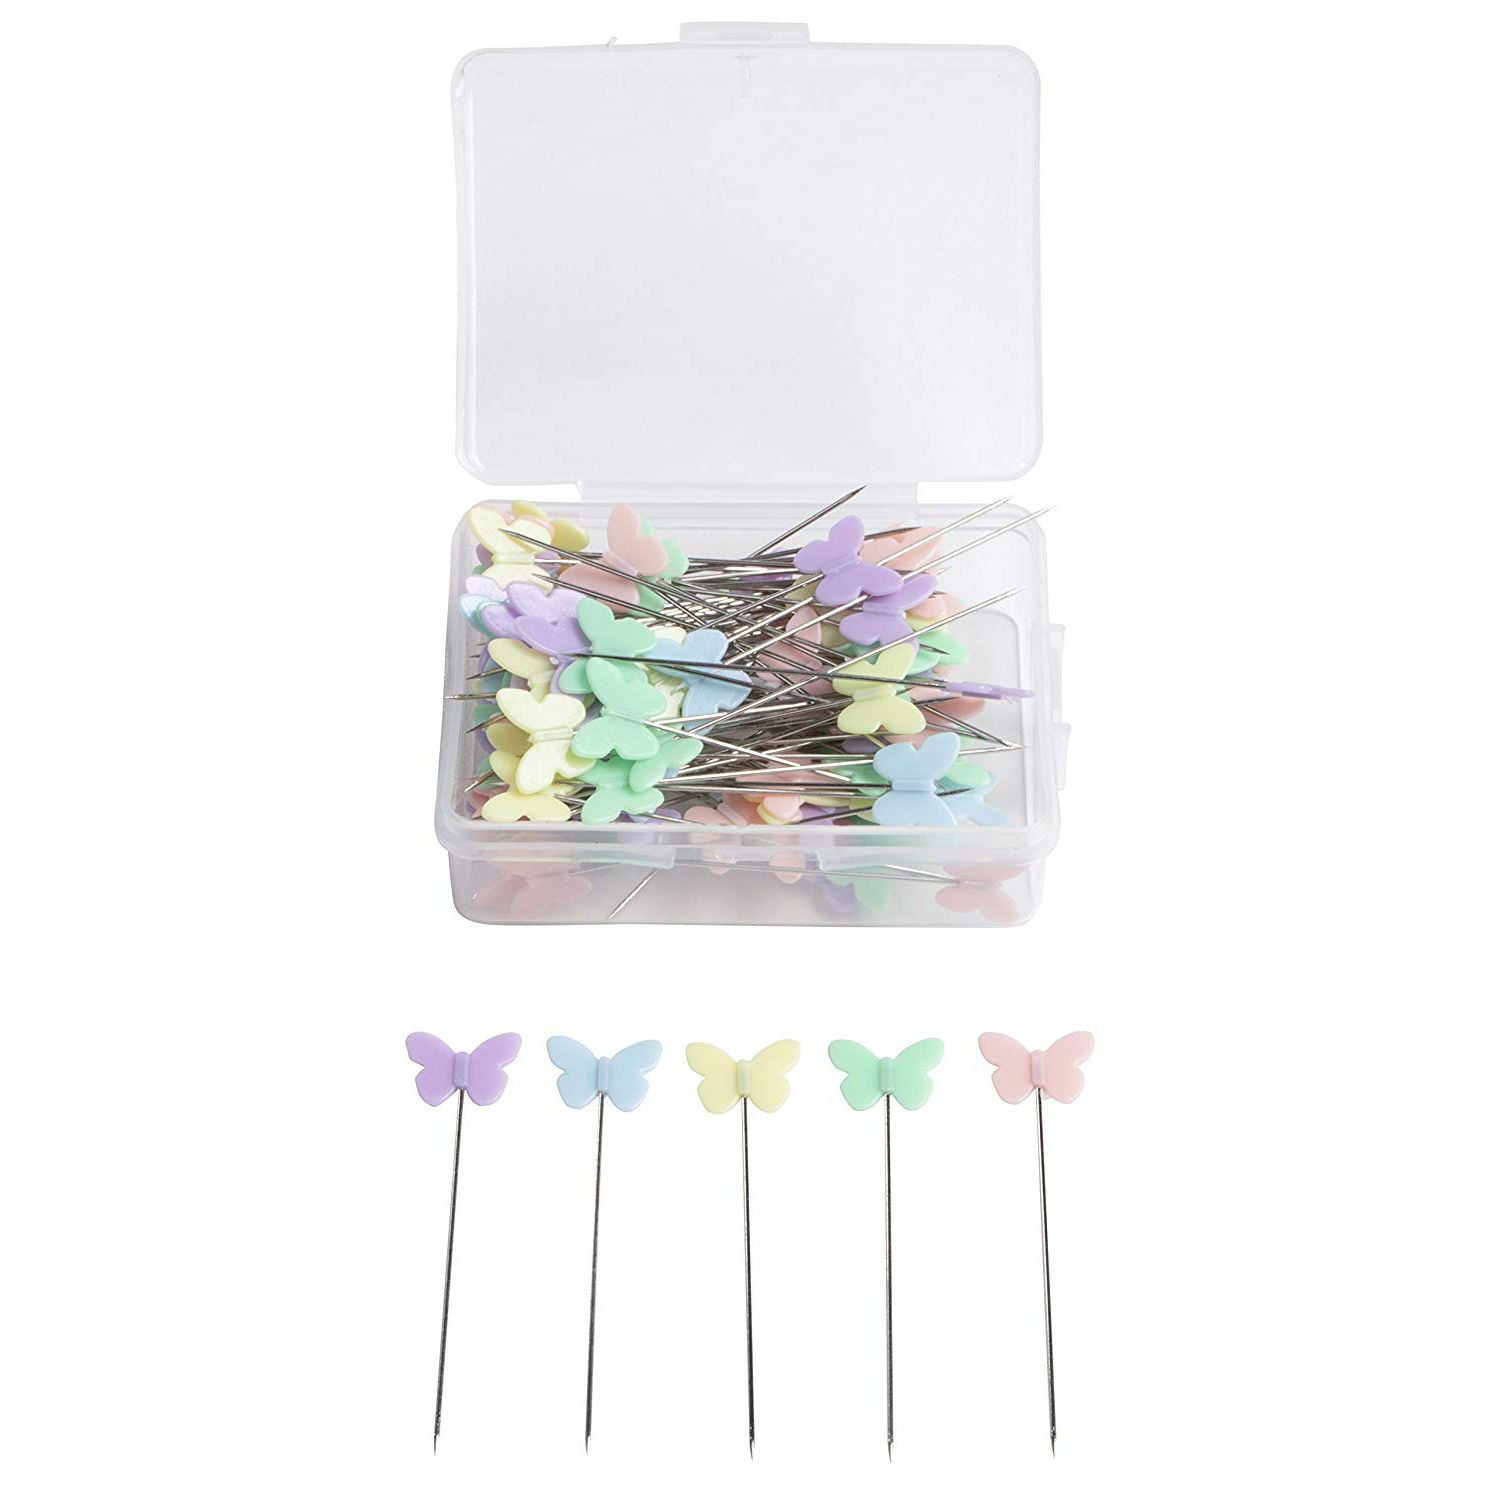 Sewing Pins - 475-Piece Flat Head Pins, Straight Quilting Pins for ...